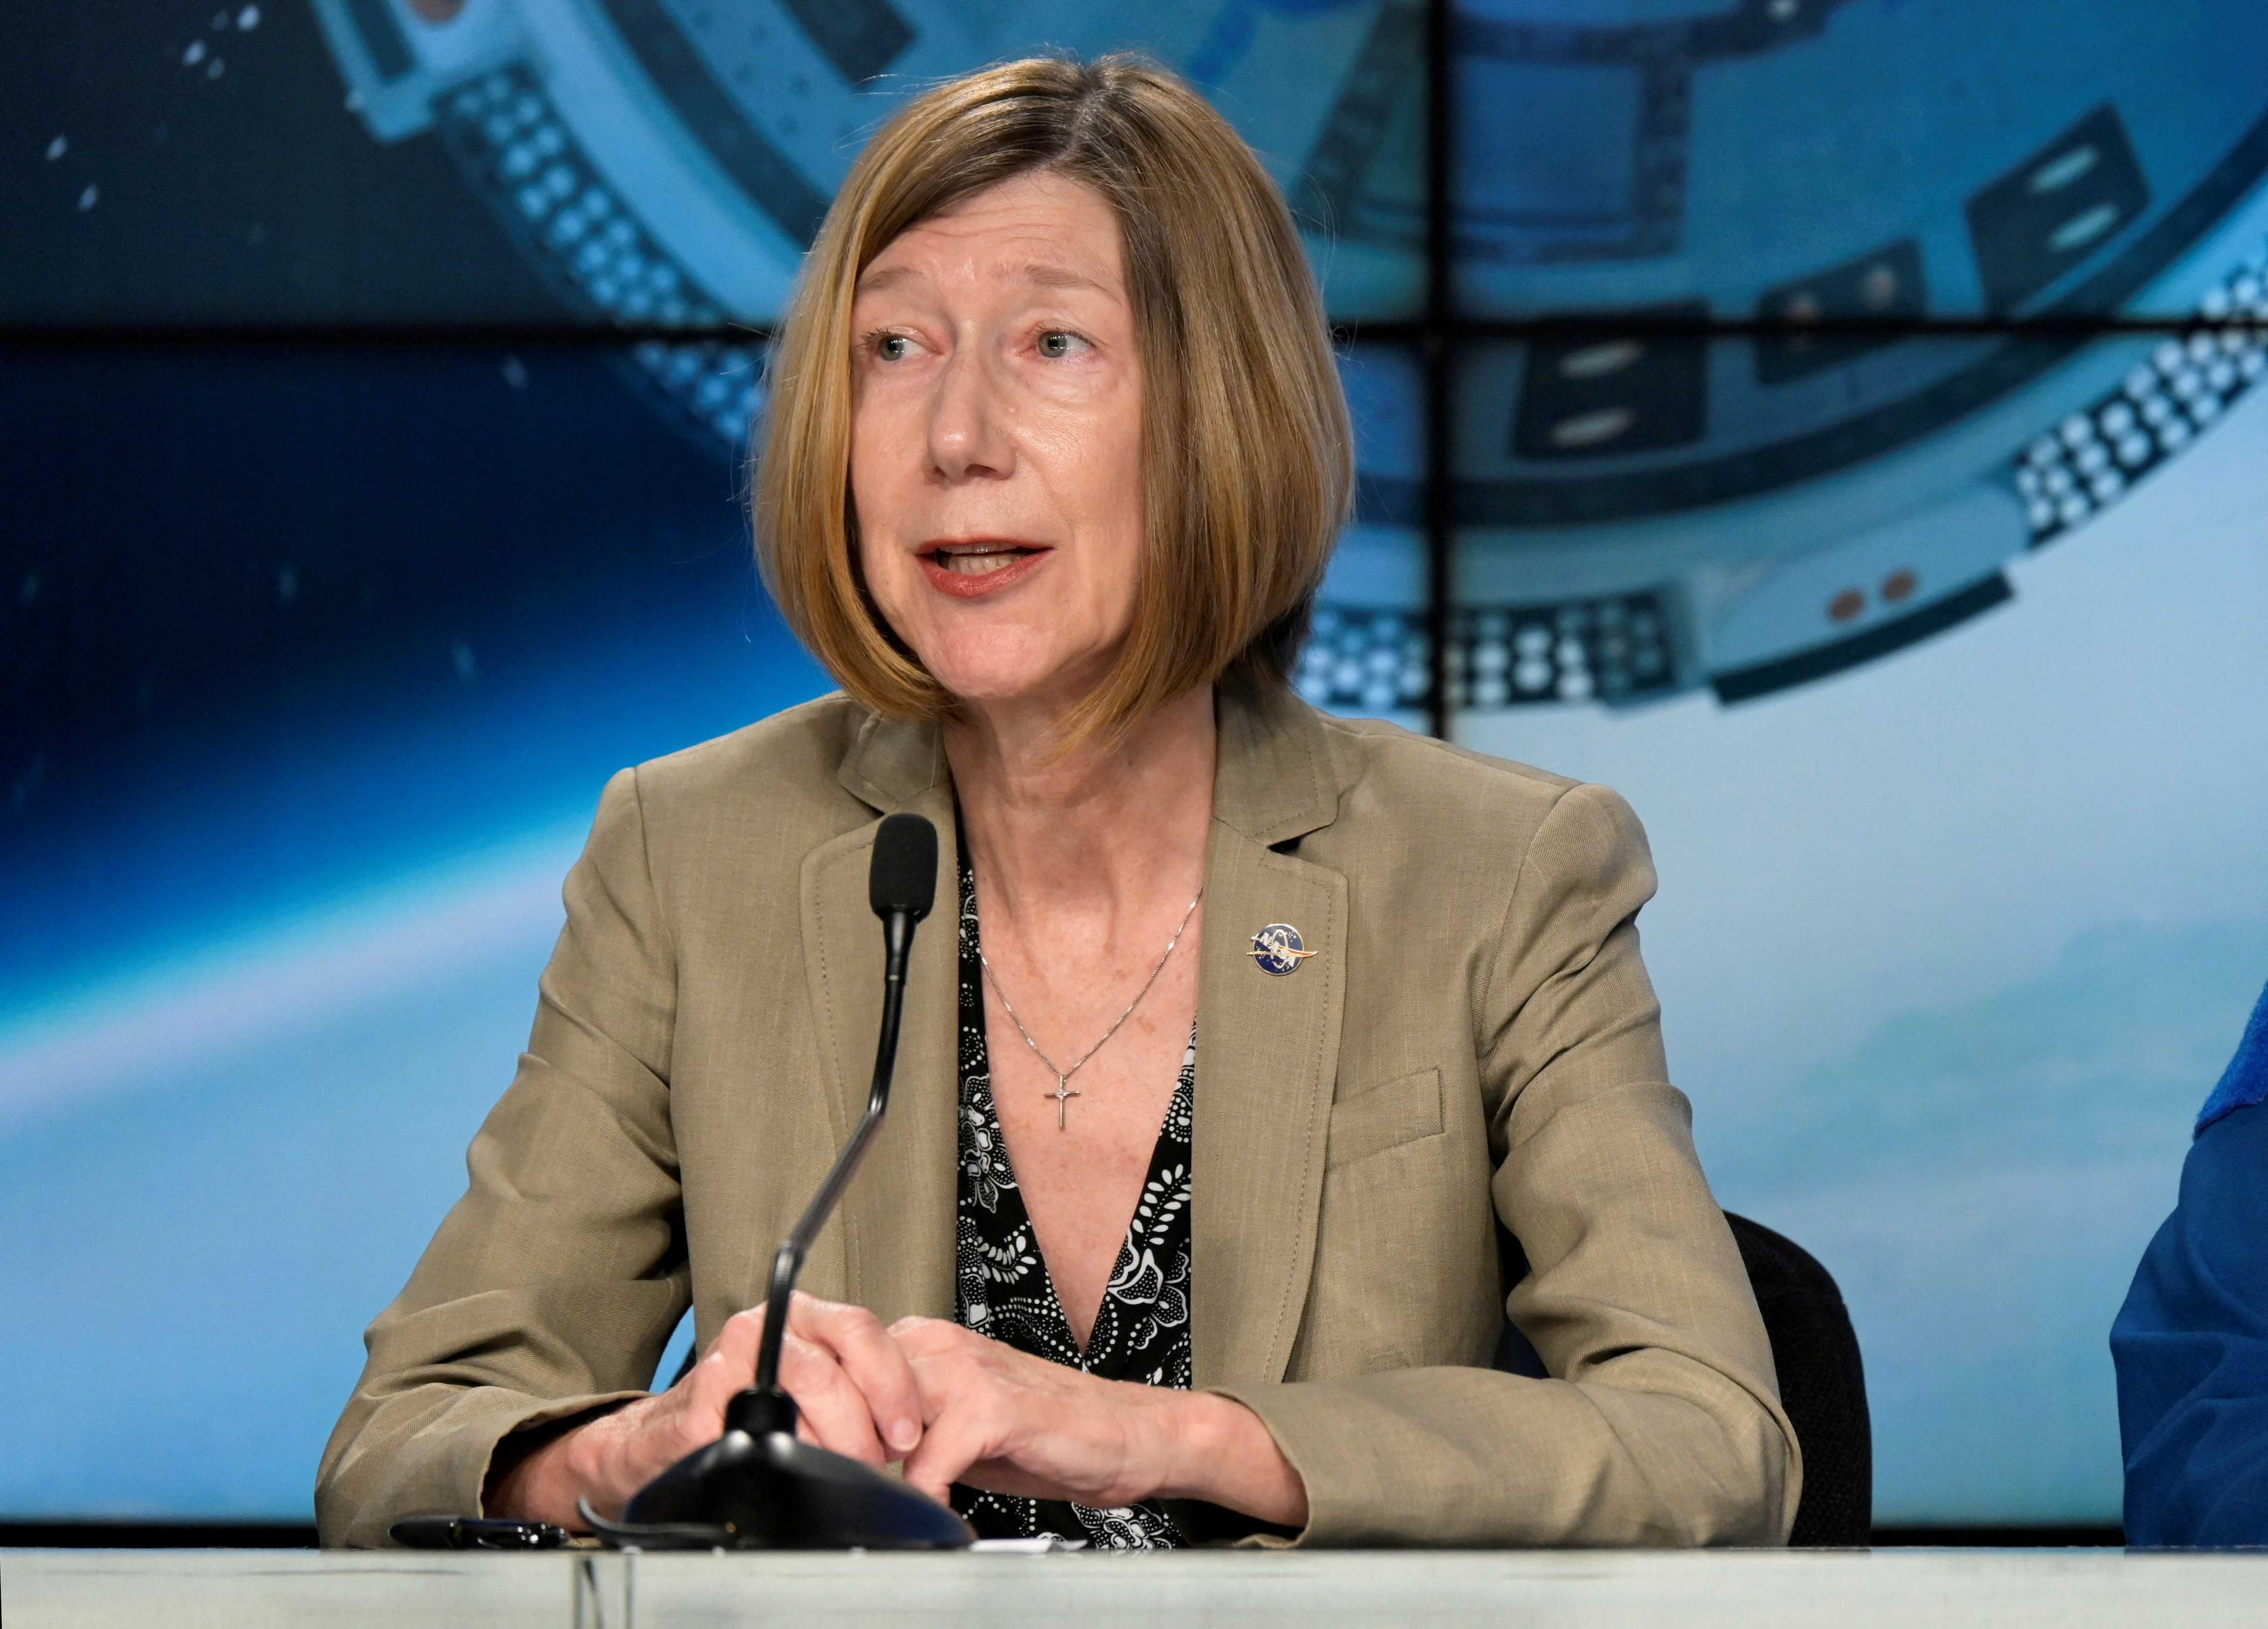 Nasa's Kathy Lueders talks about the upcoming launch of Boeing's CST-100 Starliner spacecraft aboard a United Launch Alliance Atlas 5 rocket on a second unpiloted test flight to the International Space Station during a news conference at the Kennedy Space Center, at Cape Canaveral, Florida, US May 18, 2022. Photo: Reuters